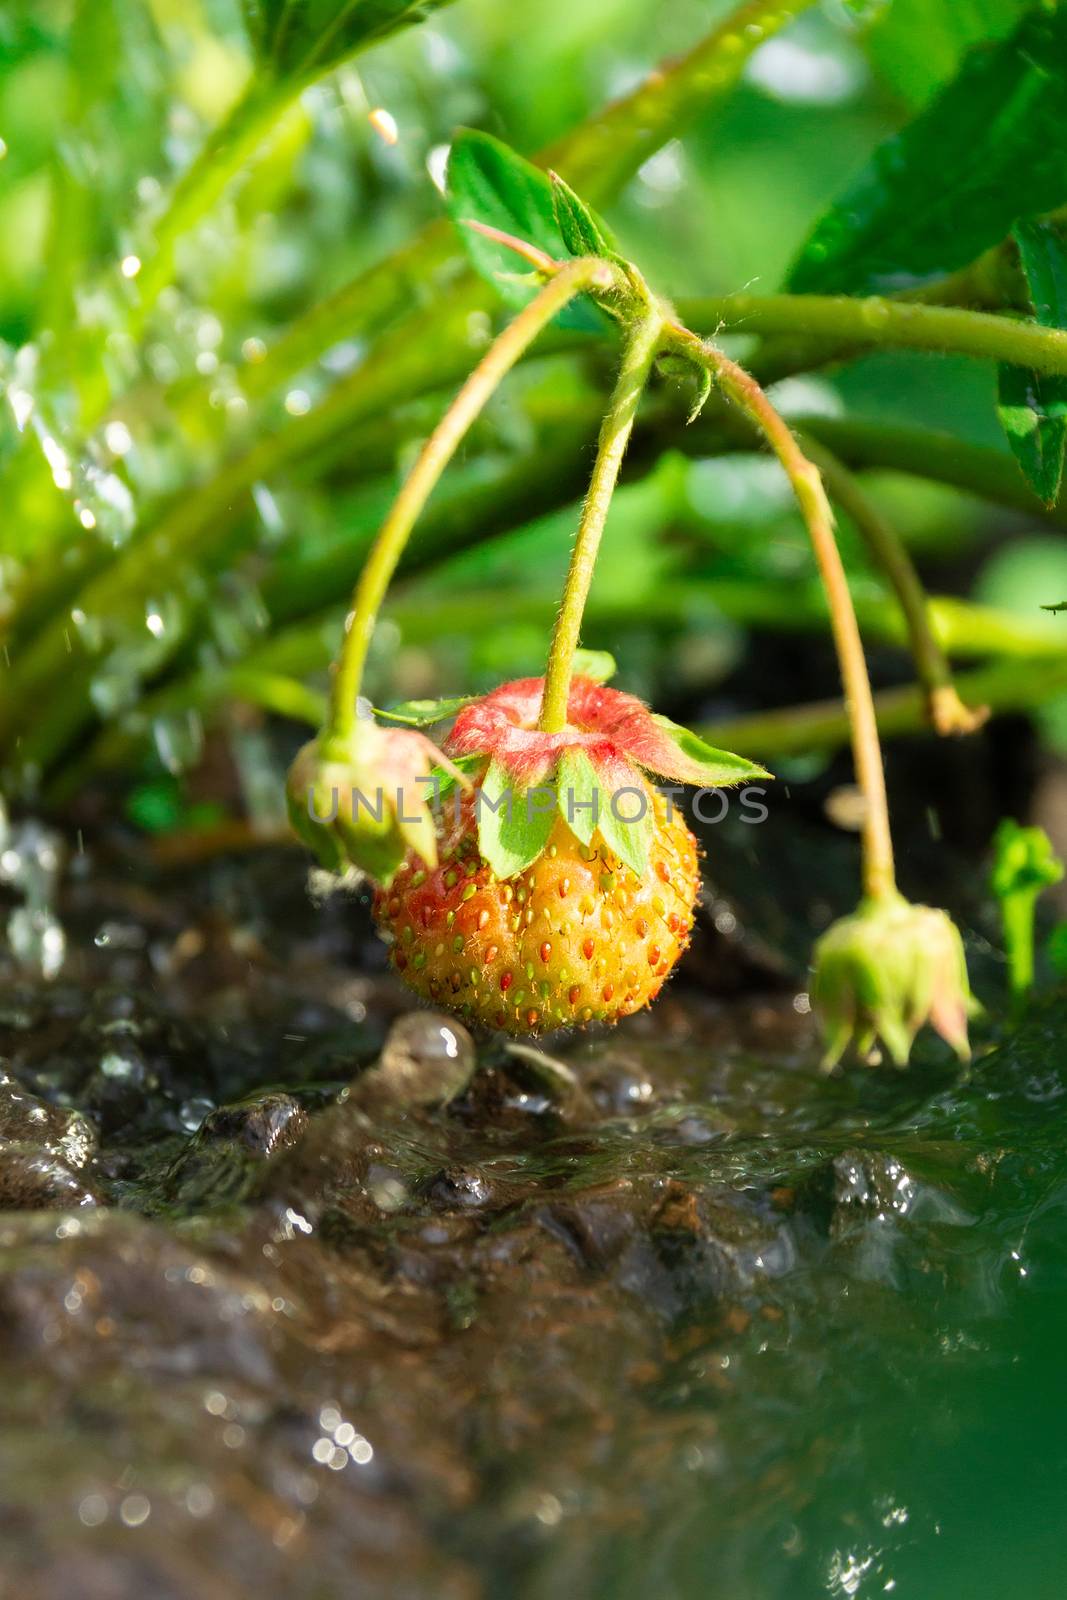 watering a strawberry bush on a vegetable garden from a watering can